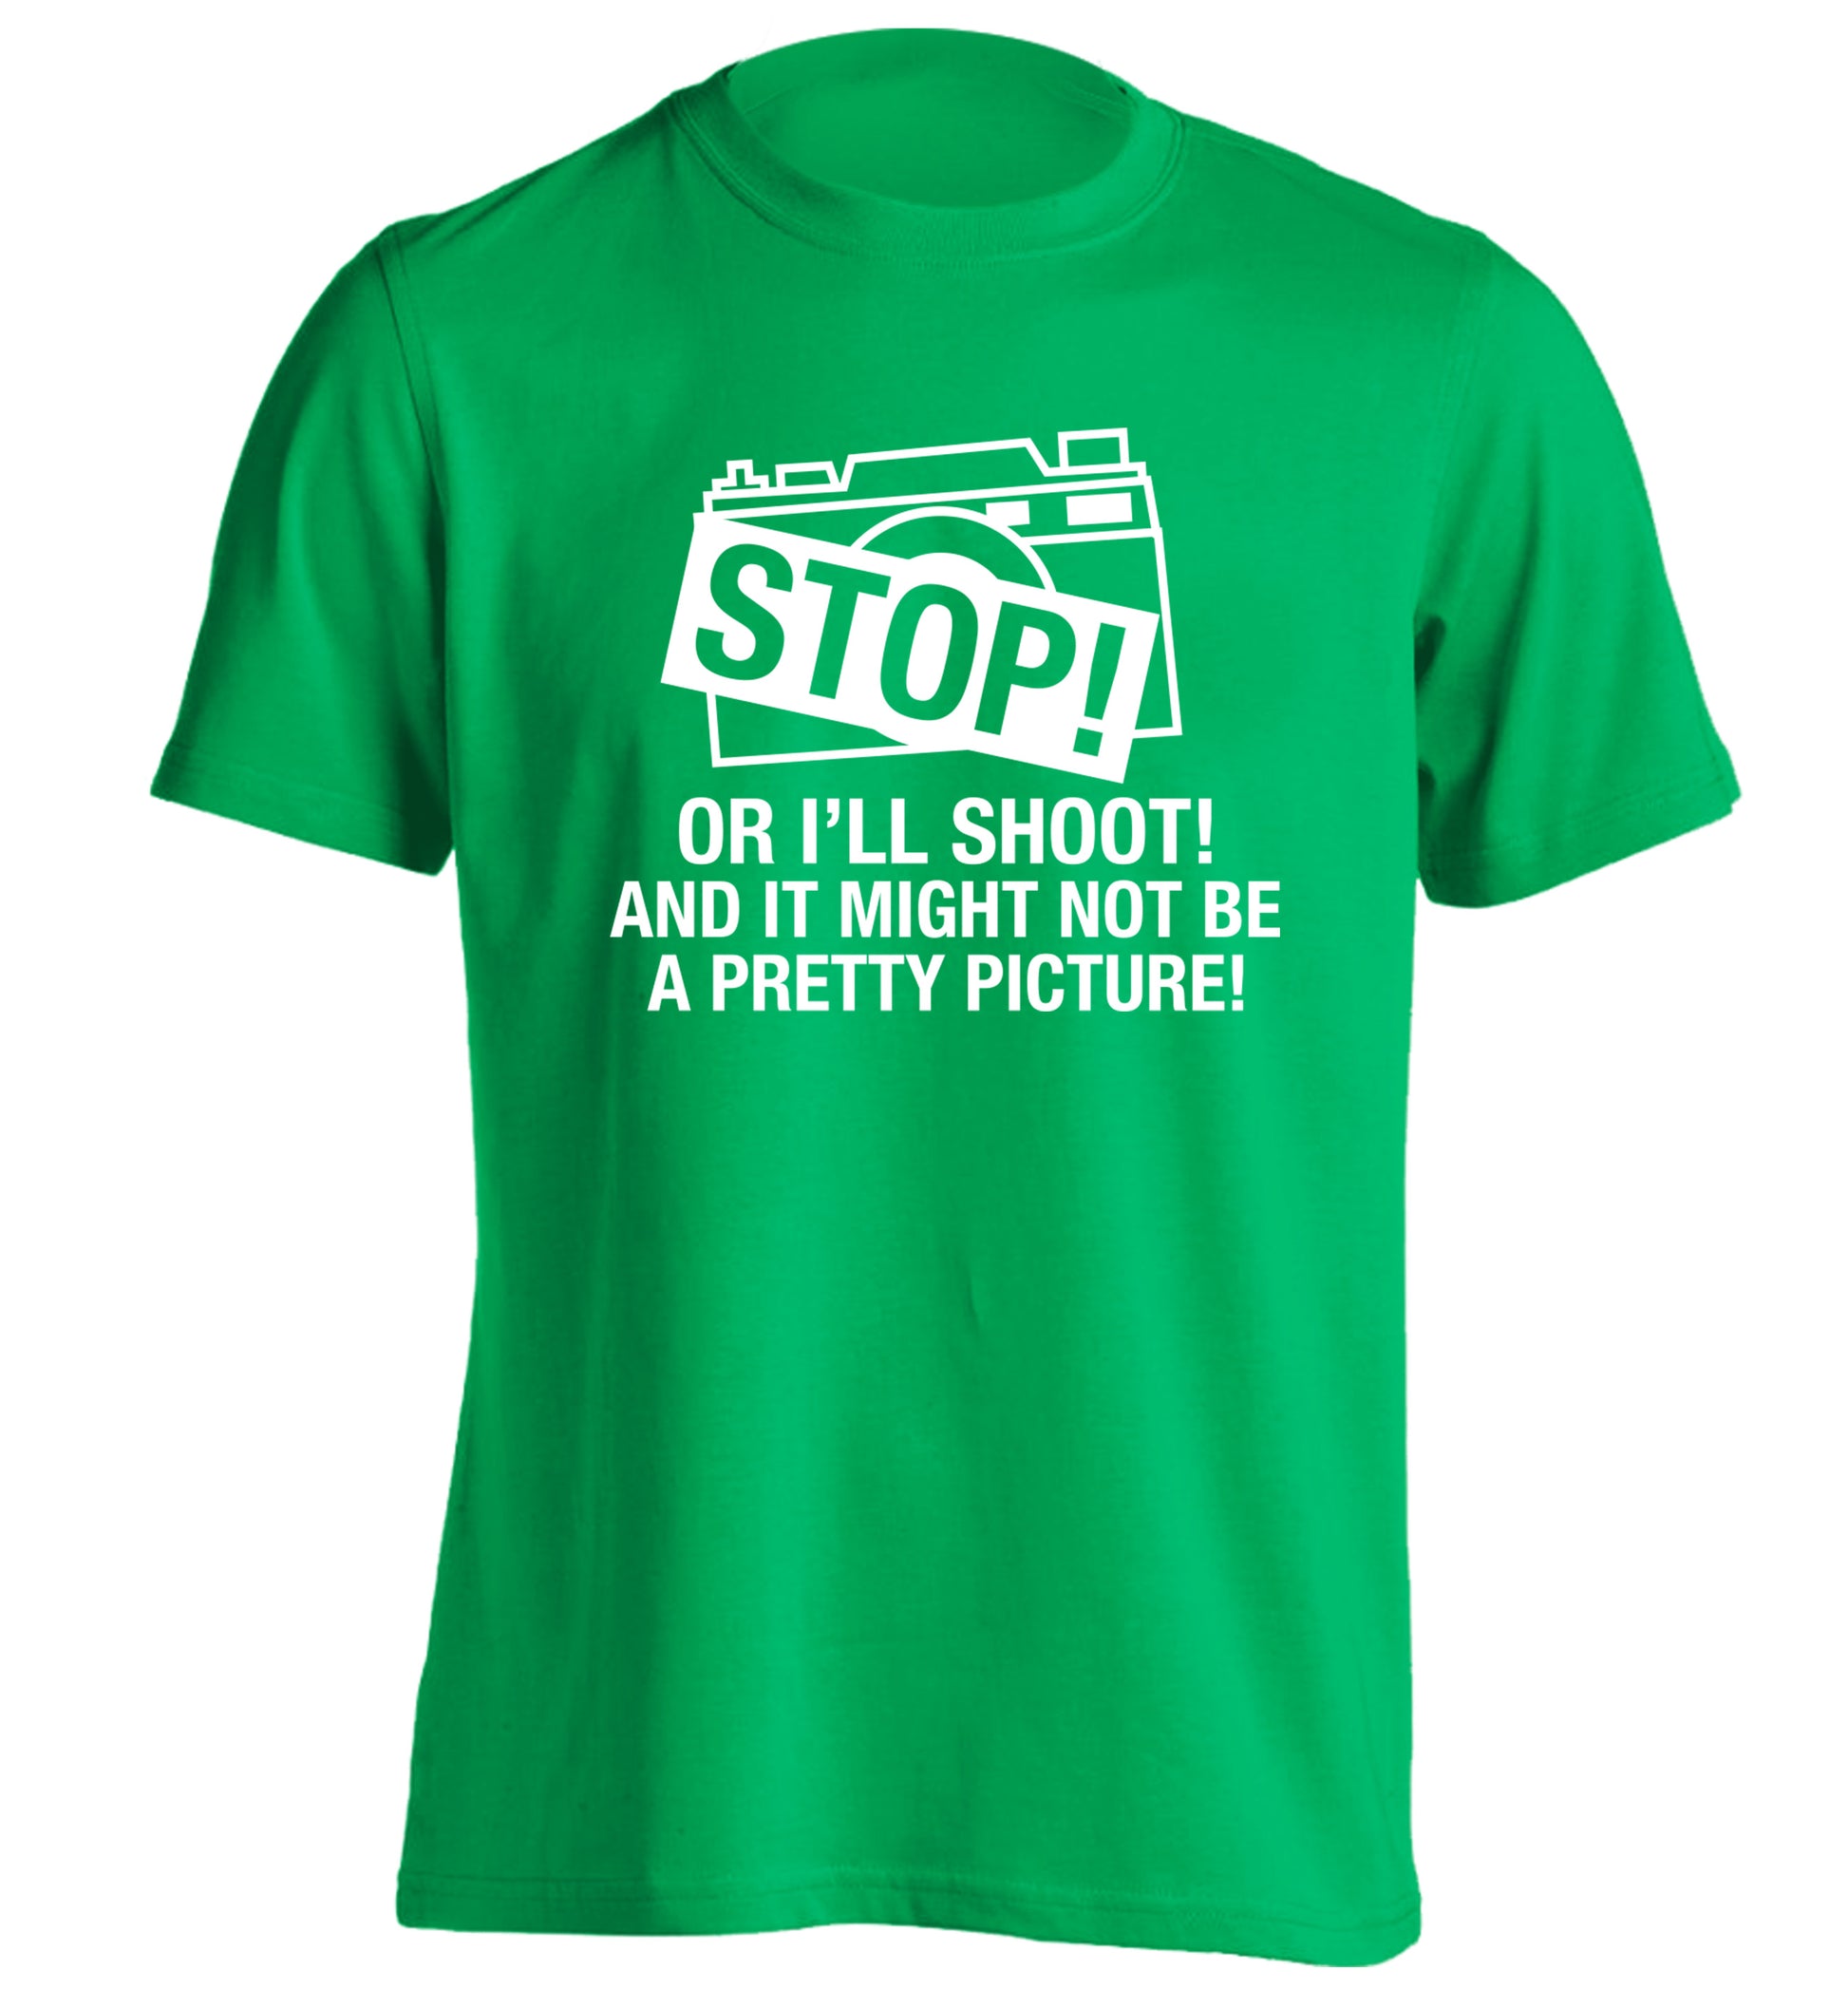 Stop or I'll shoot and it won't be a pretty picture adults unisex green Tshirt 2XL